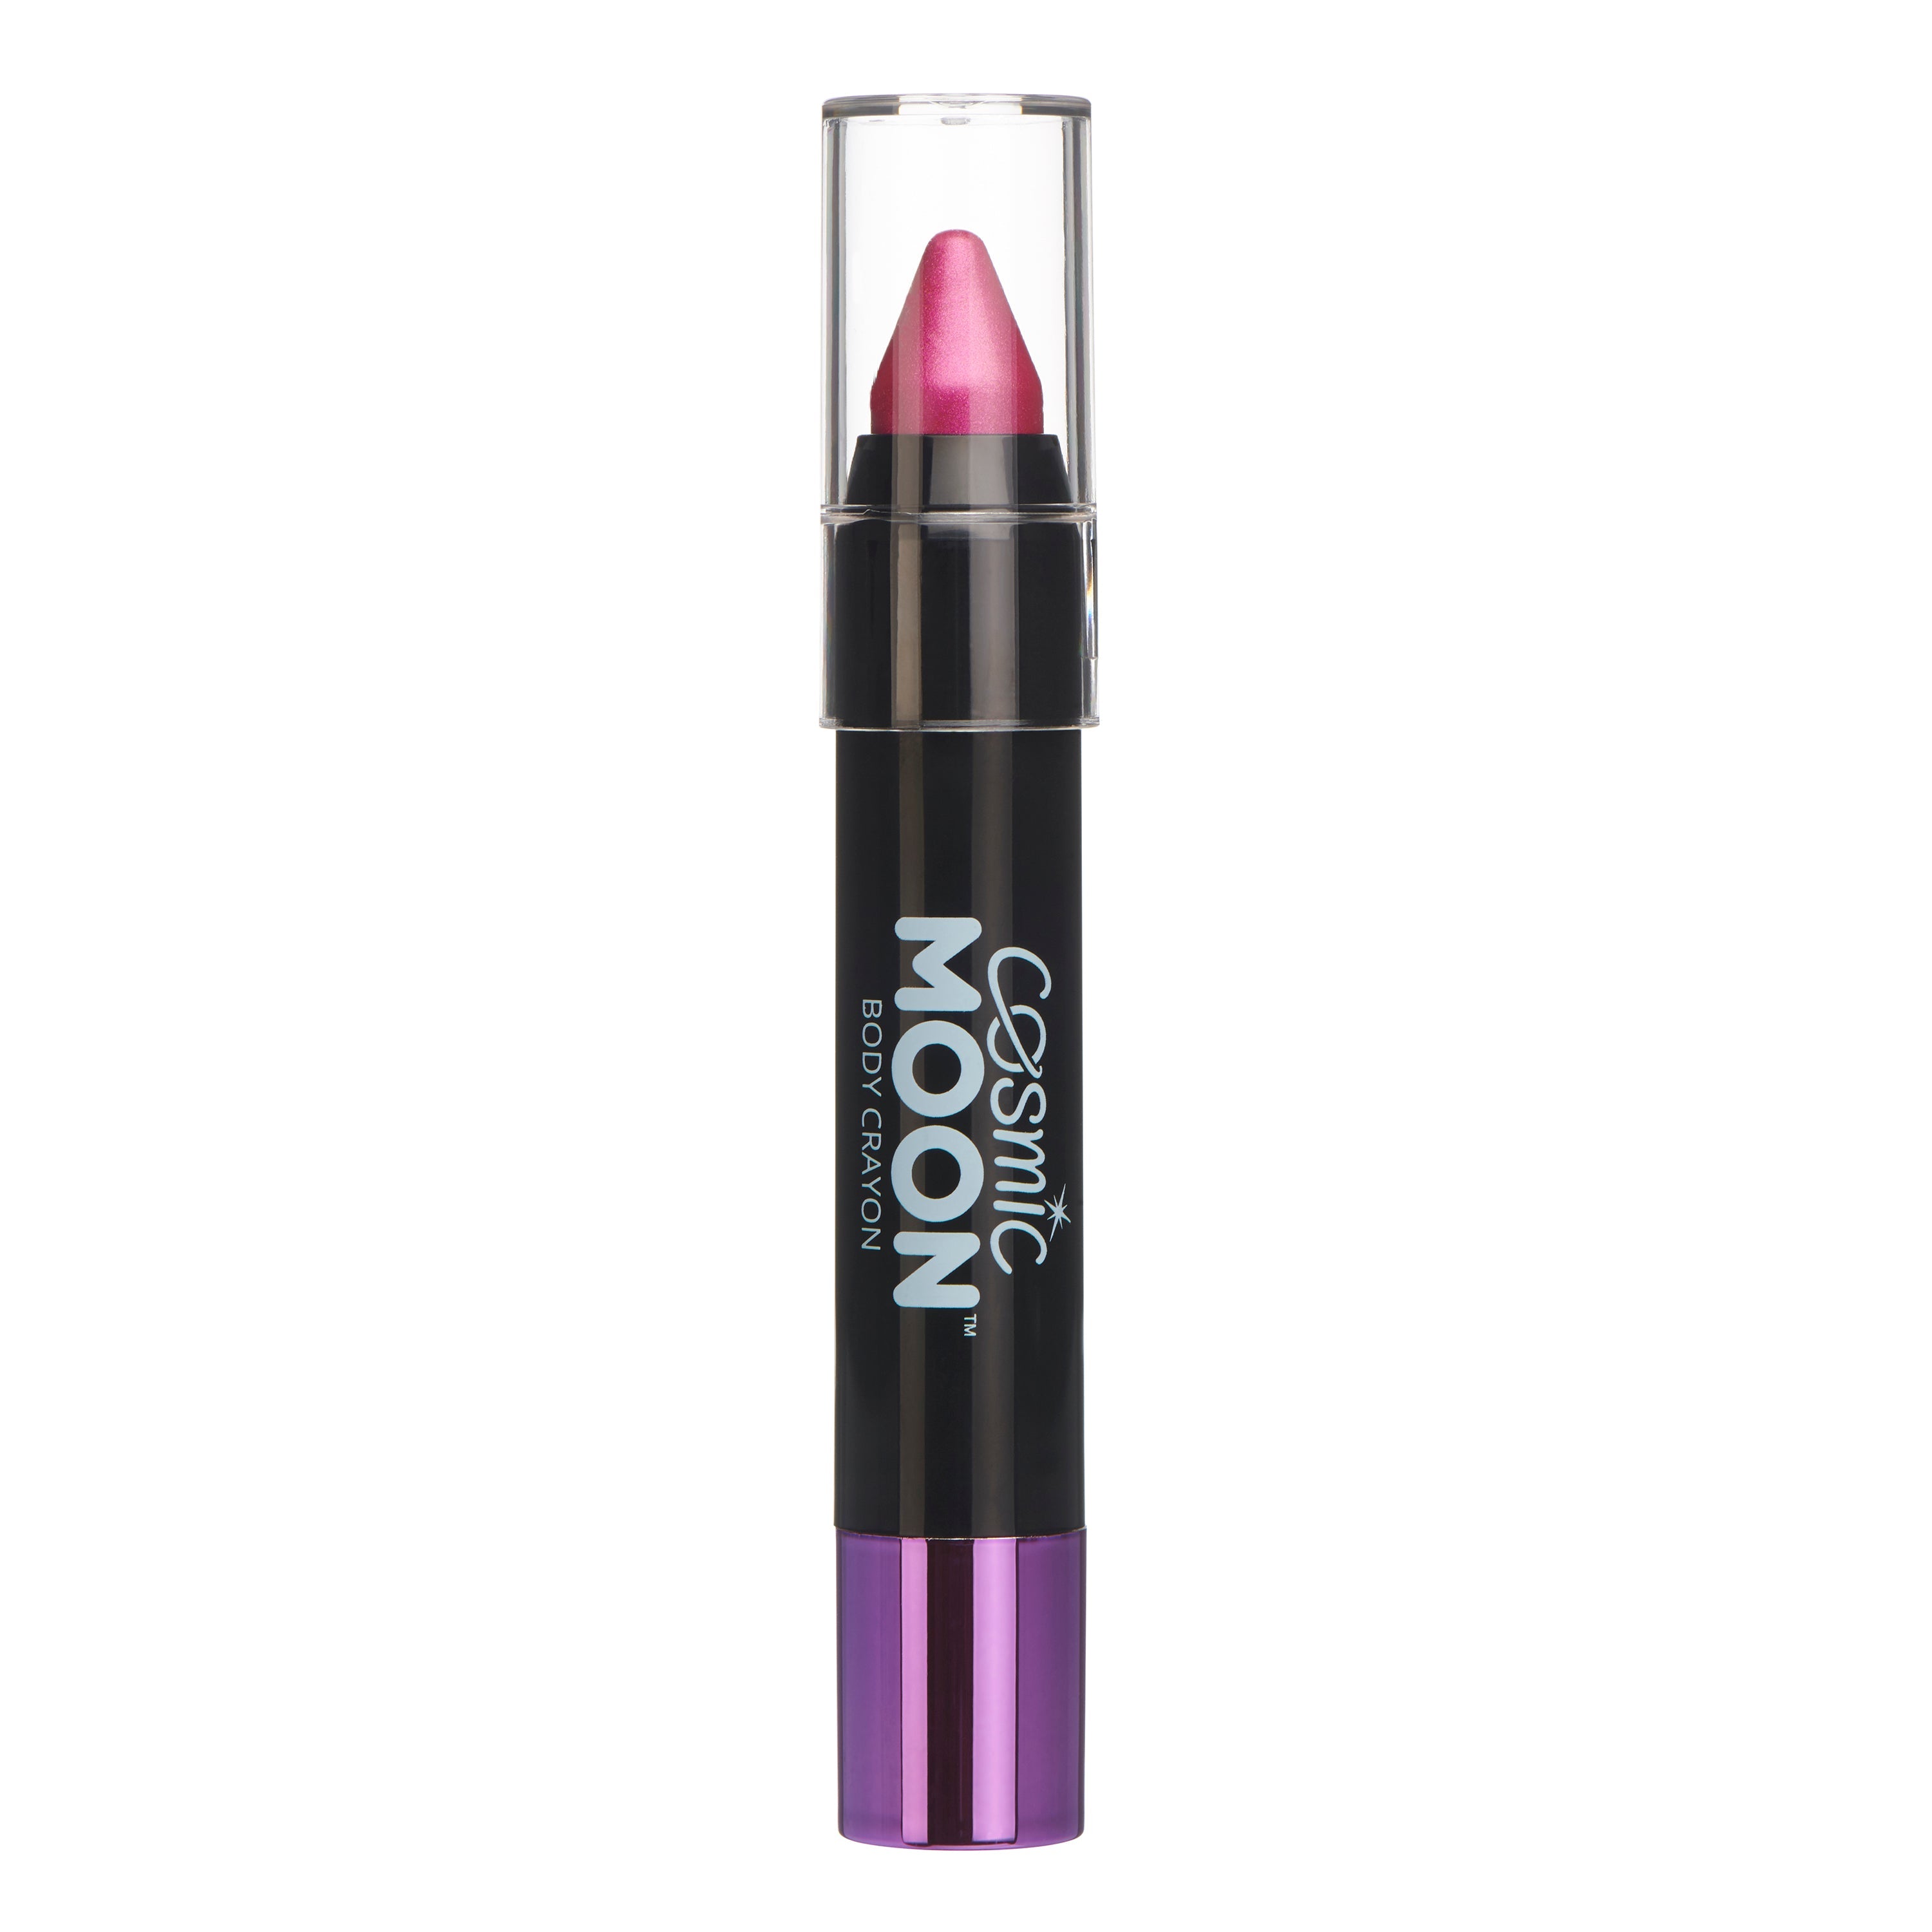 Pink - Metallic Face & Body Crayon, 3.5g. Cosmetically certified, FDA & Health Canada compliant and cruelty free.